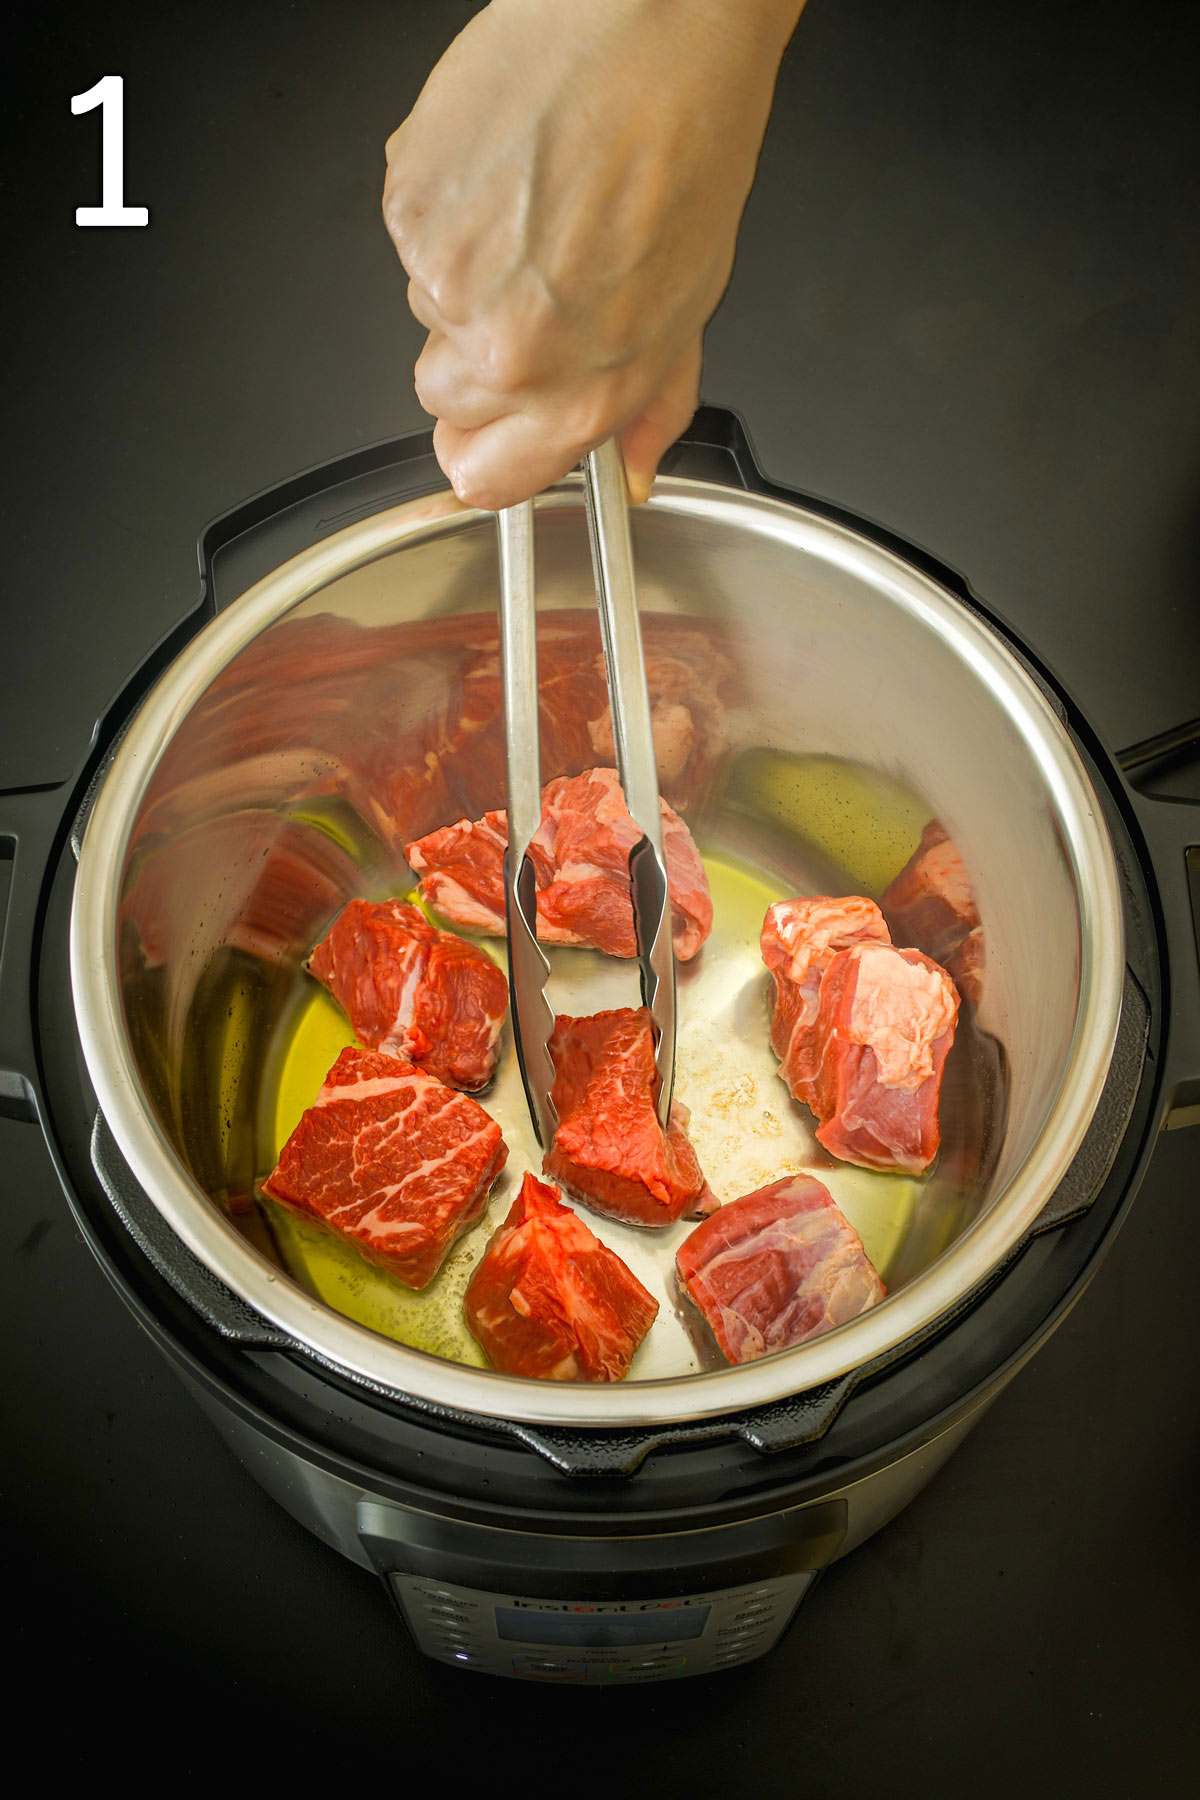 browning meat cubes in oil in the instant pot.